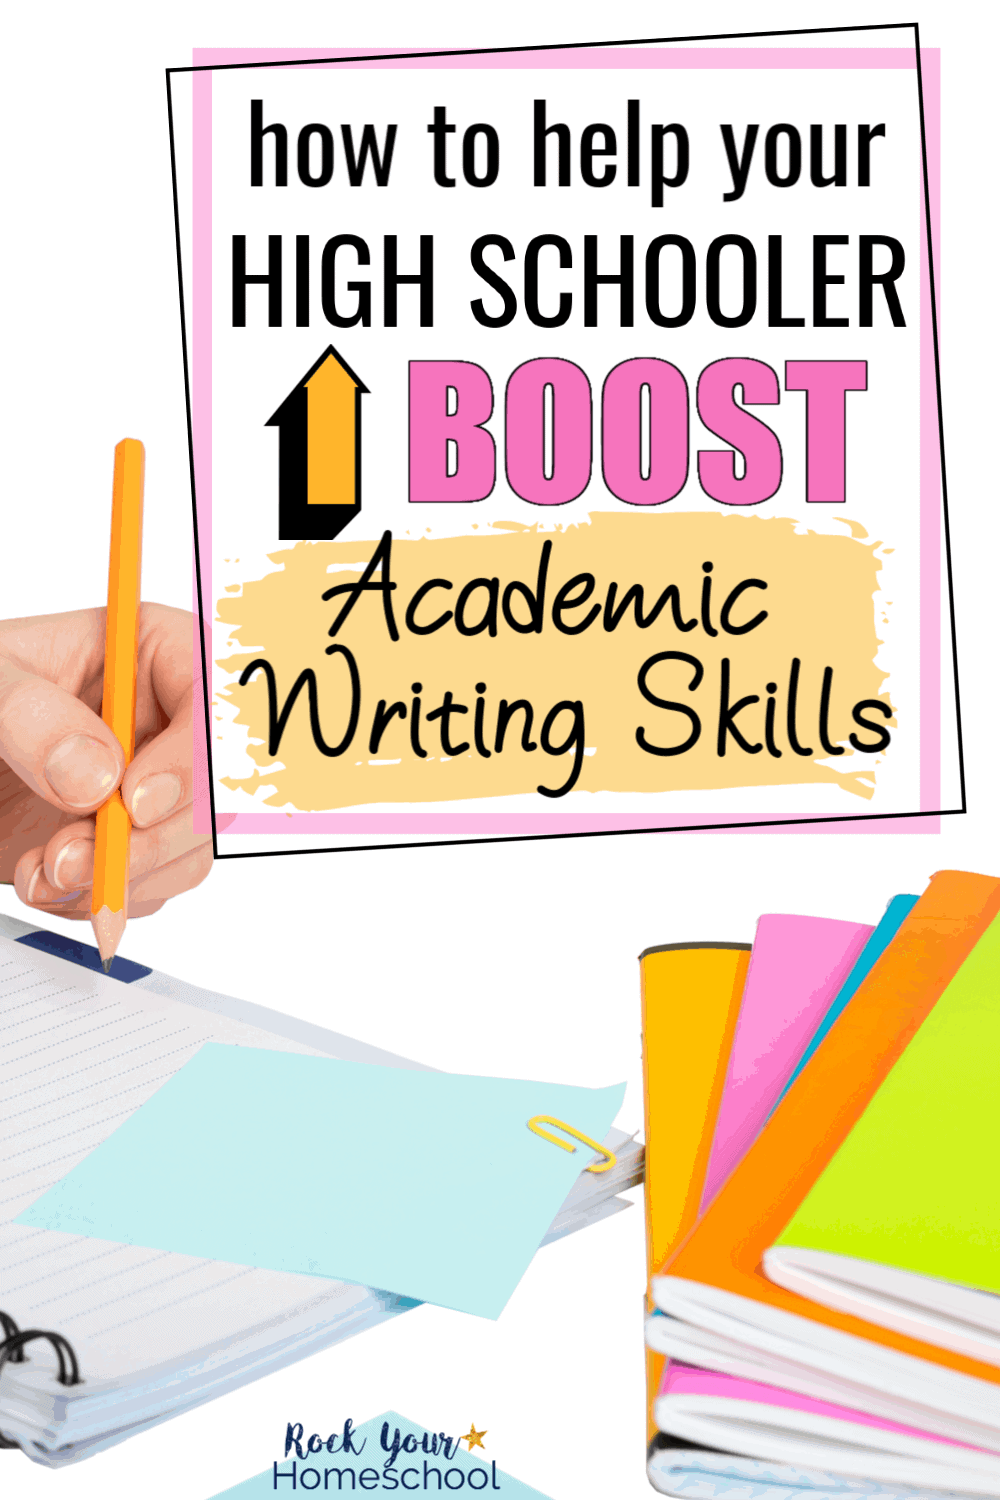 How to Help Your High Schooler Boost Academic Writing Skills